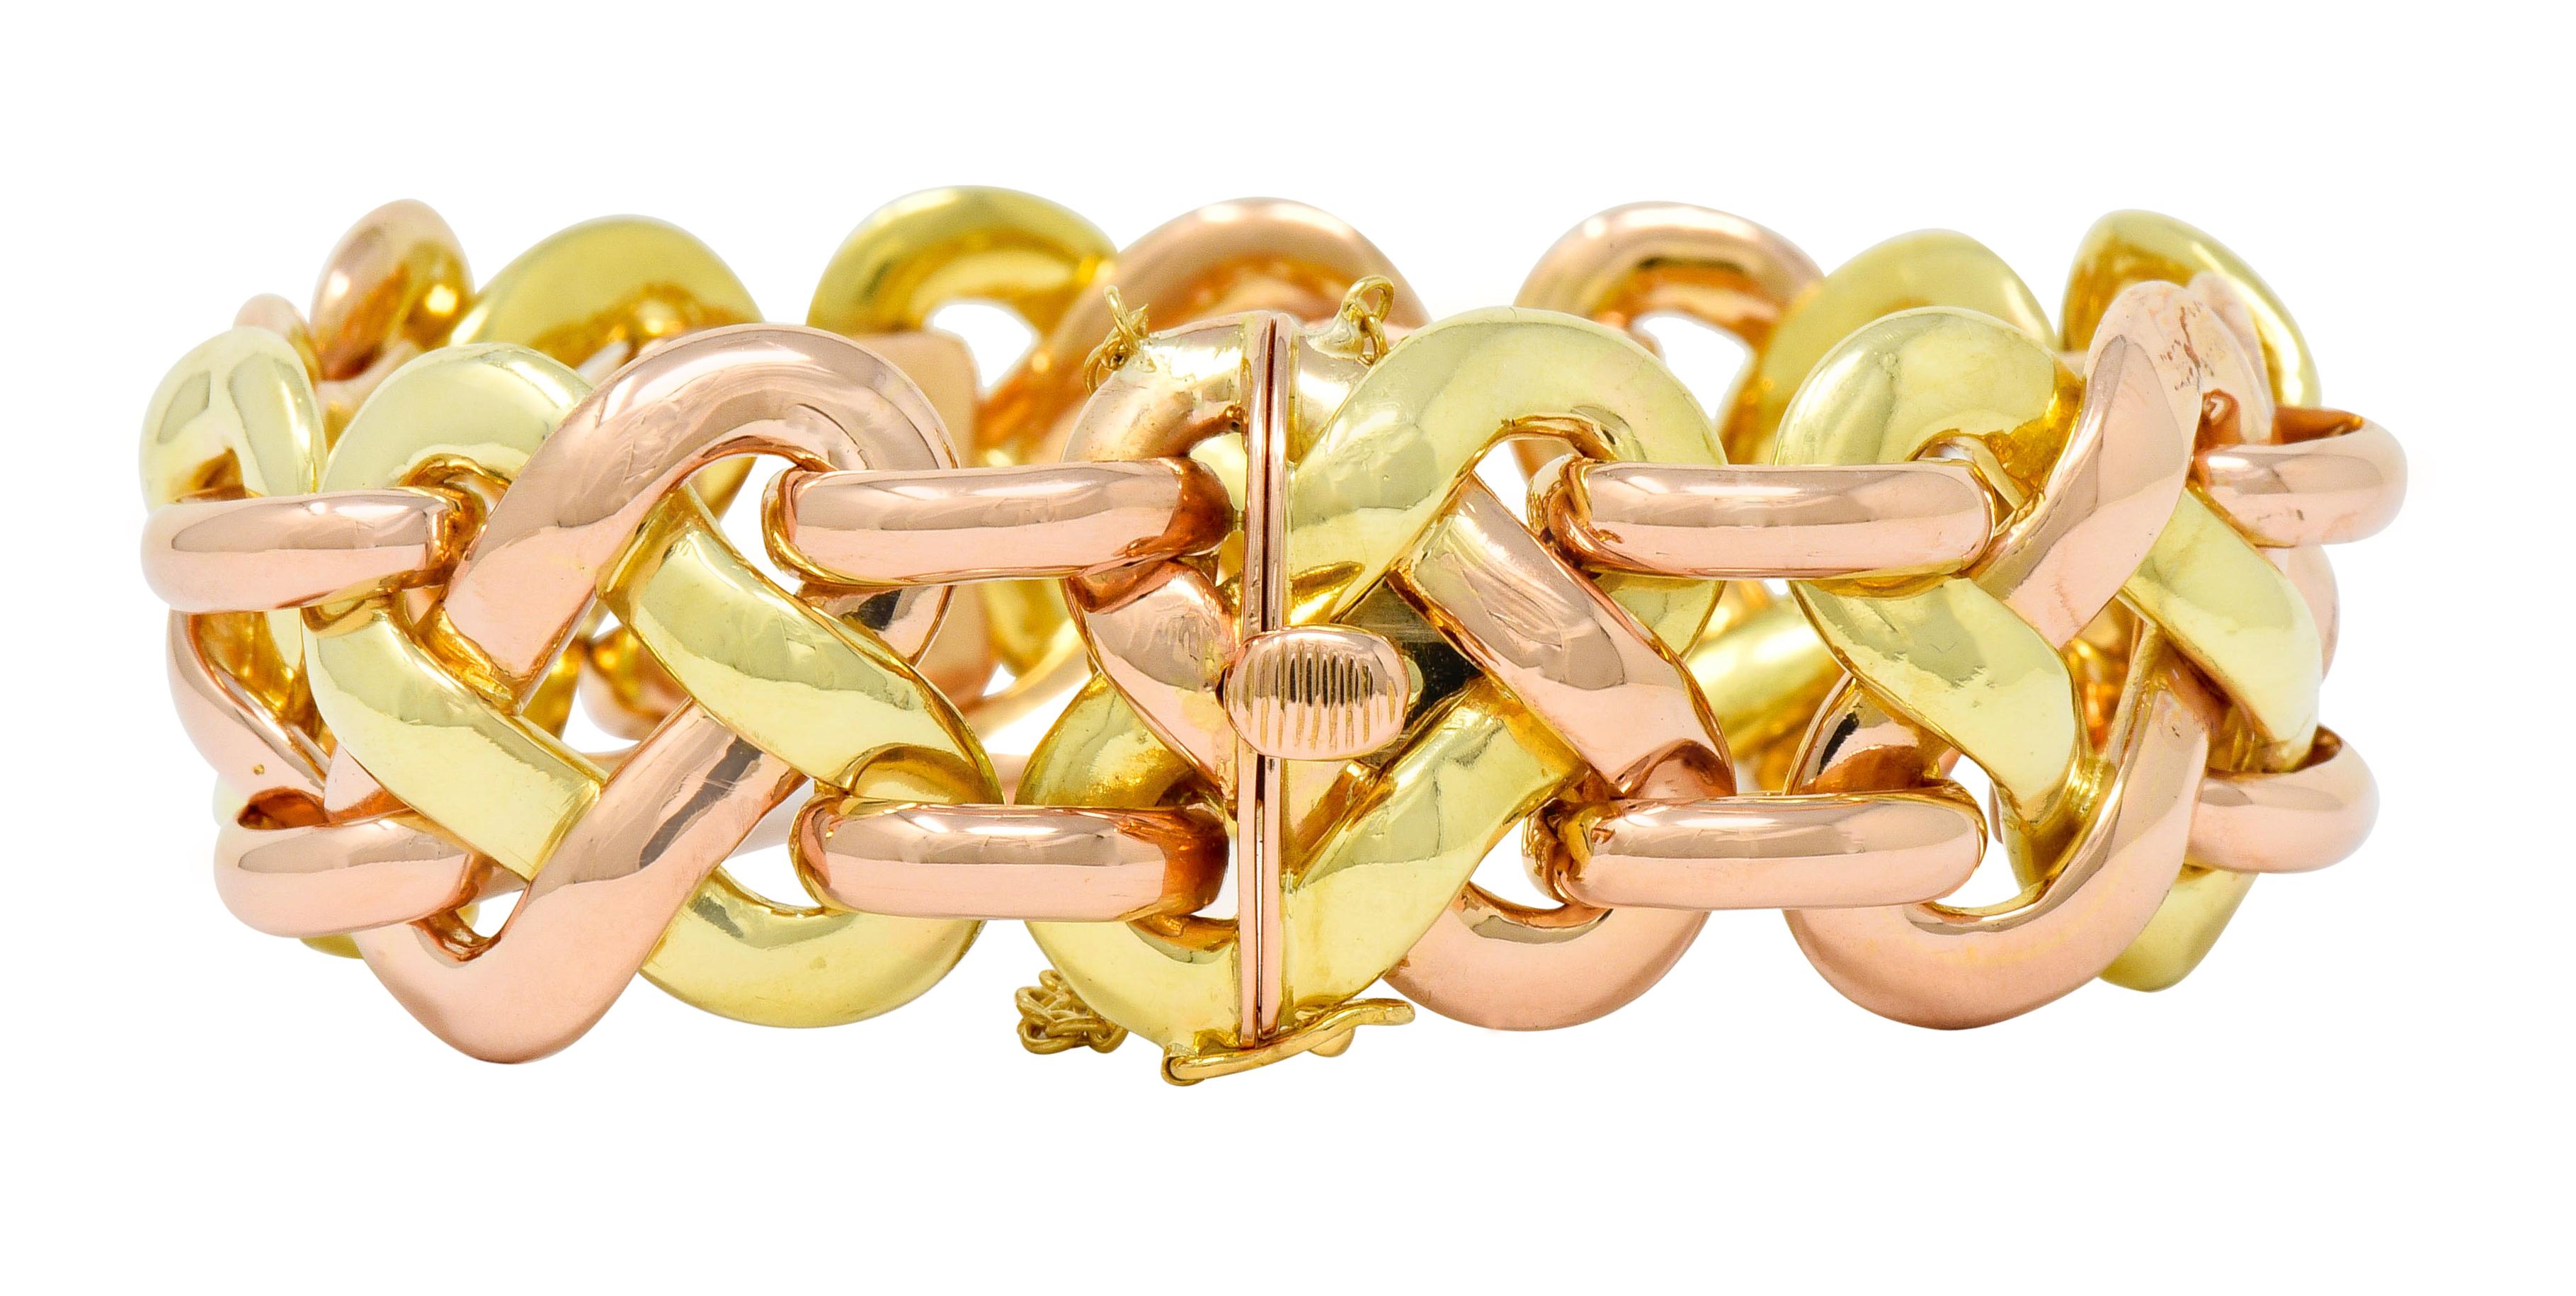 Link style bracelet designed as woven Celtic-like knots of polished rose and yellow gold

Alternating with rose gold spacer links

Completed by a concealed clasp and chain safety with an additional figure eight safety

With maker's mark for Carlo